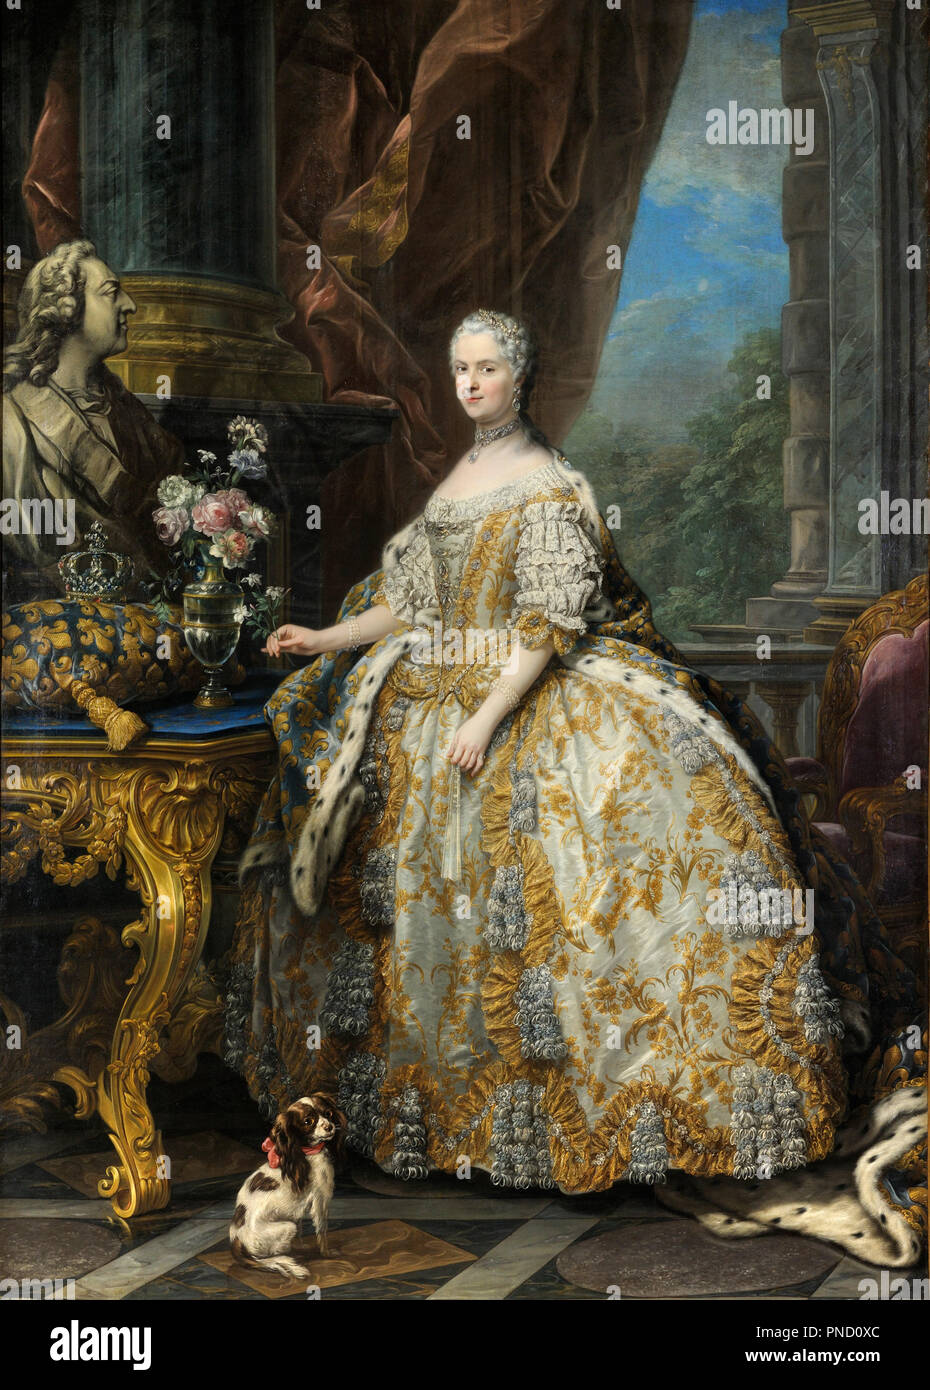 Marie Leszczinska, reine de France (1703-1768) / Marie Leszczinska, Queen of France (1703-1768). Date/Period: 1747. Painting. Oil on canvas. Height: 274 cm (107.8 in); Width: 193 cm (75.9 in). Author: VAN LOO, CHARLES-ANDRE. Stock Photo